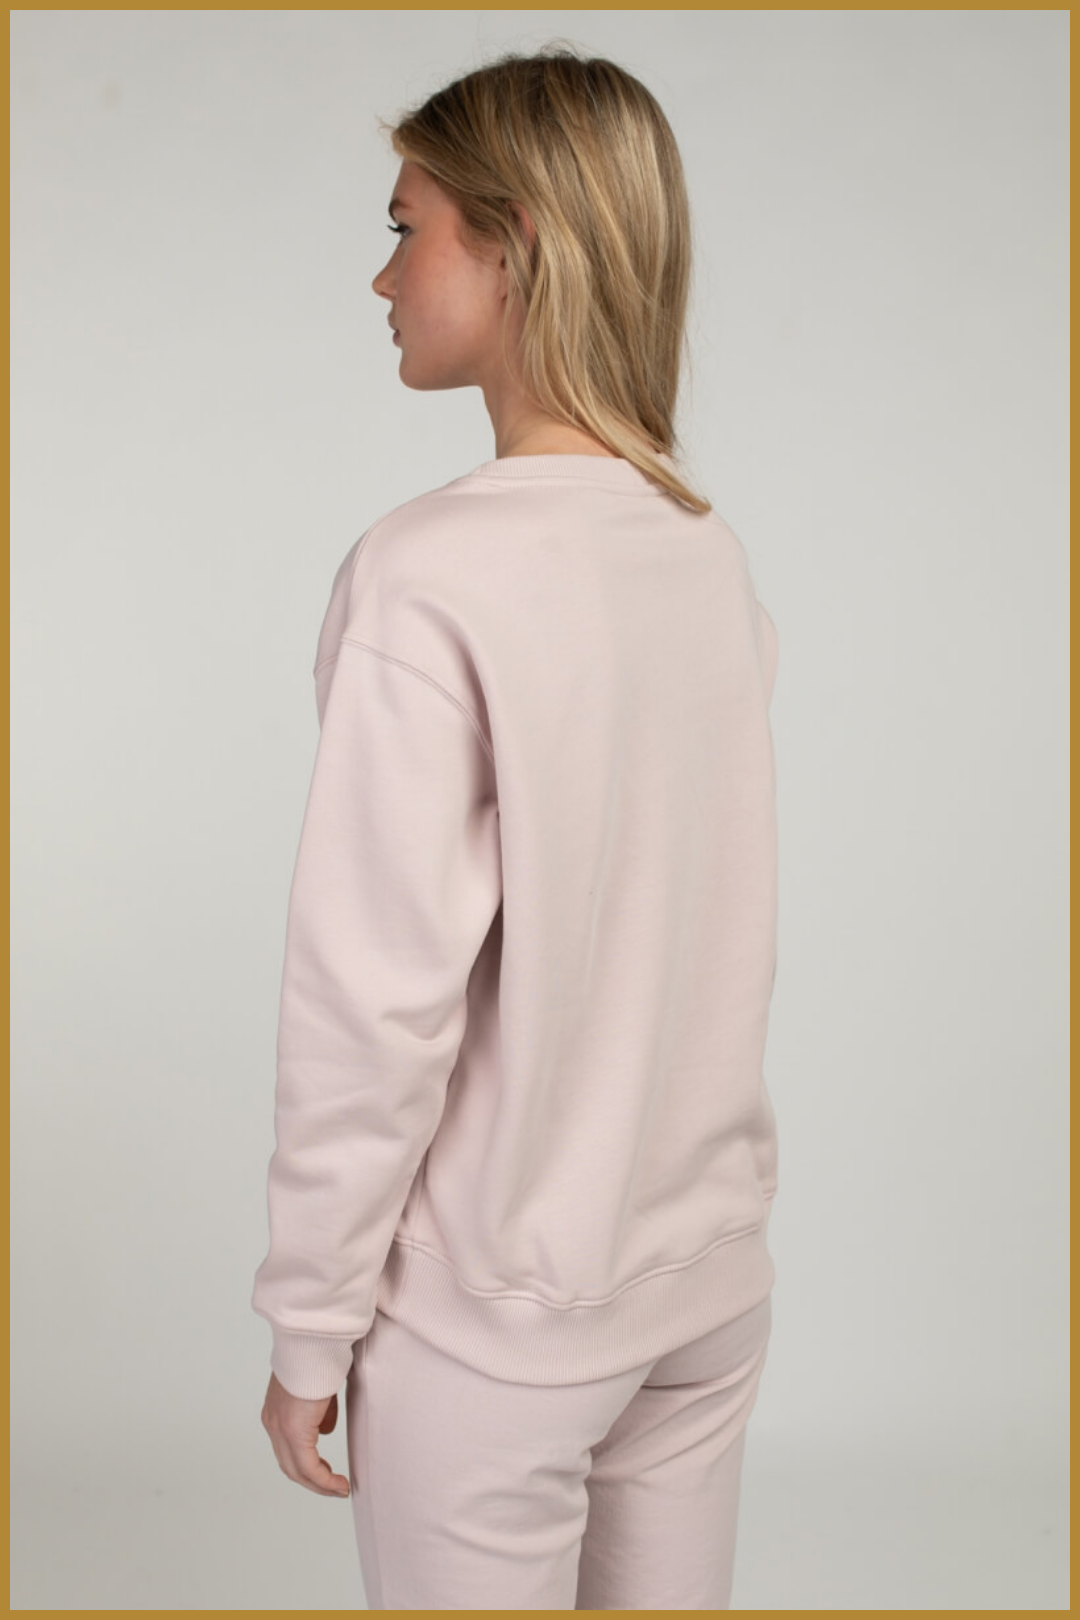 MSCW - Logosweater old pink - MOS230031